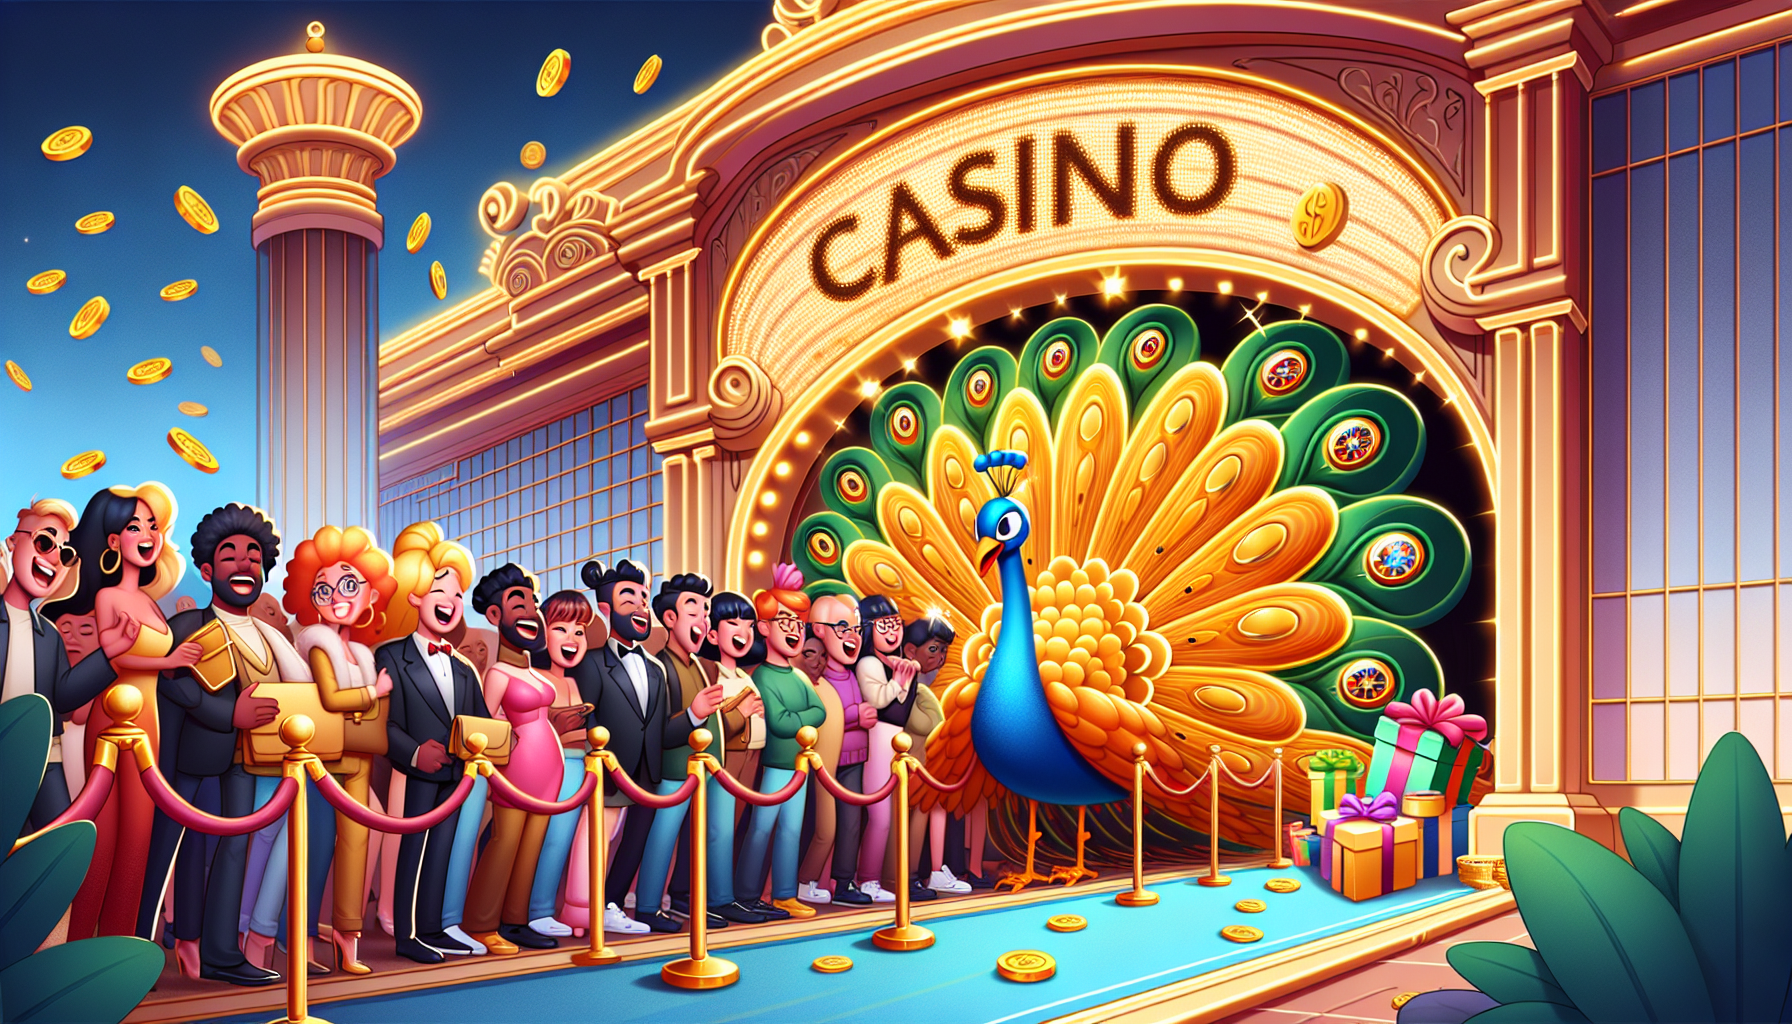 Exceptional Bonuses and Promotions at Casino Site #2